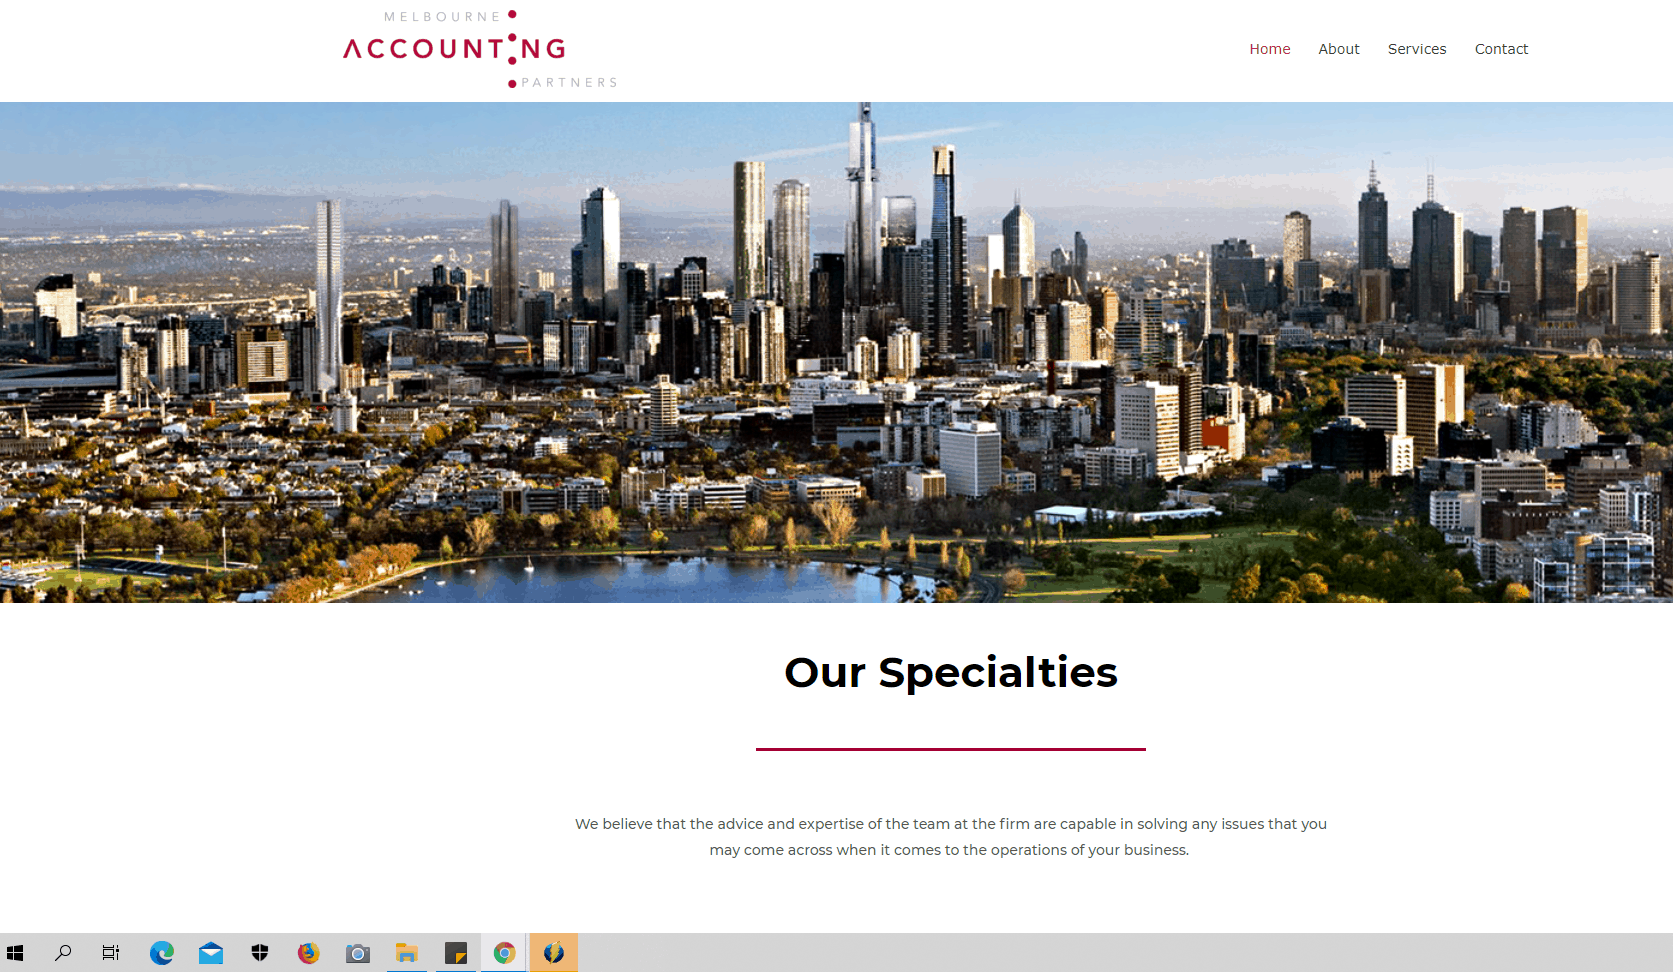 Melbourne Accounting Partners